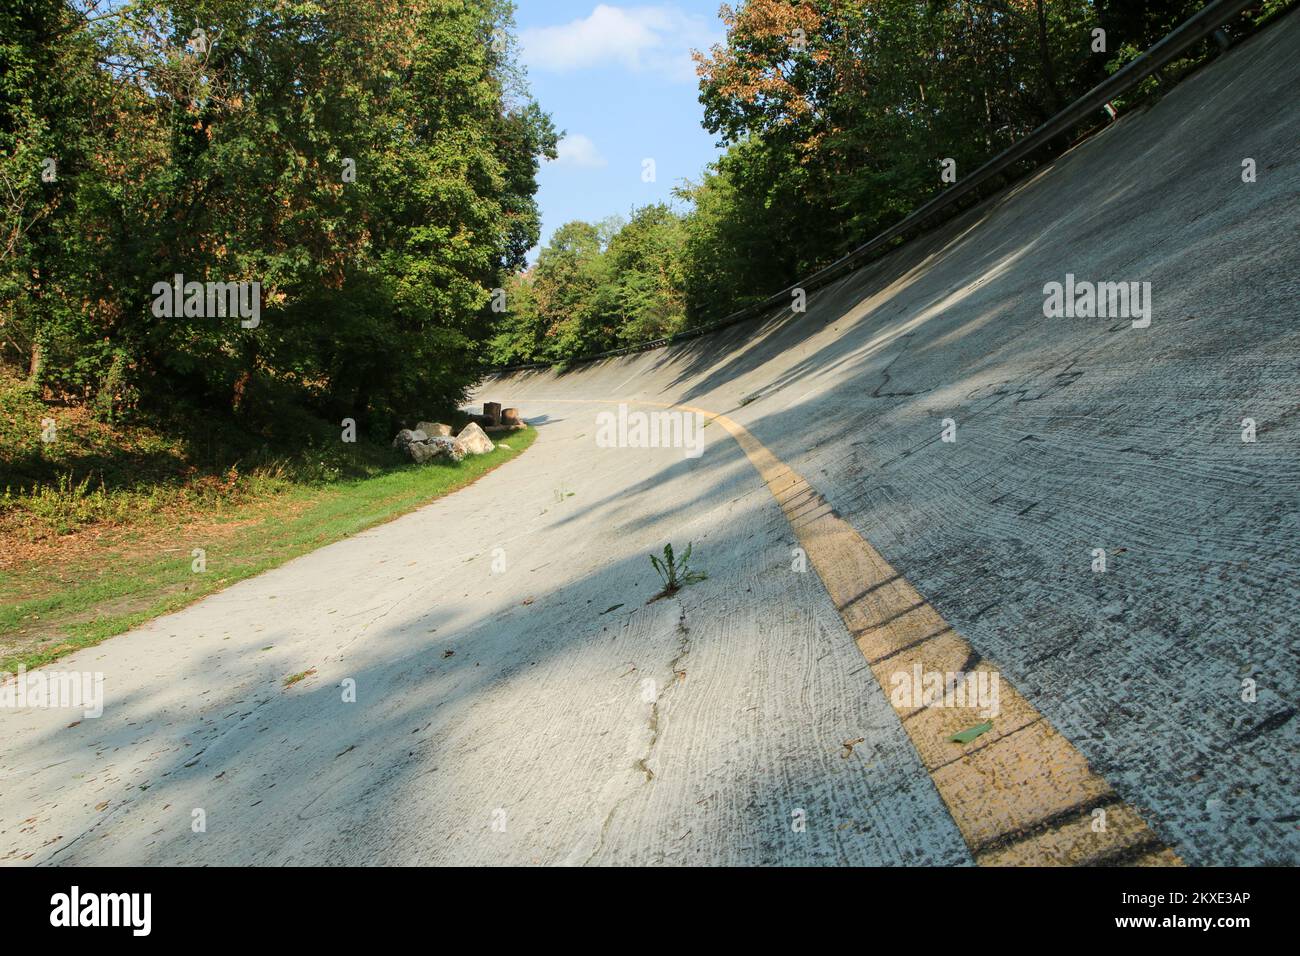 The famous historic inclined curve at the old racing circuit at Monza near Milano. Stock Photo